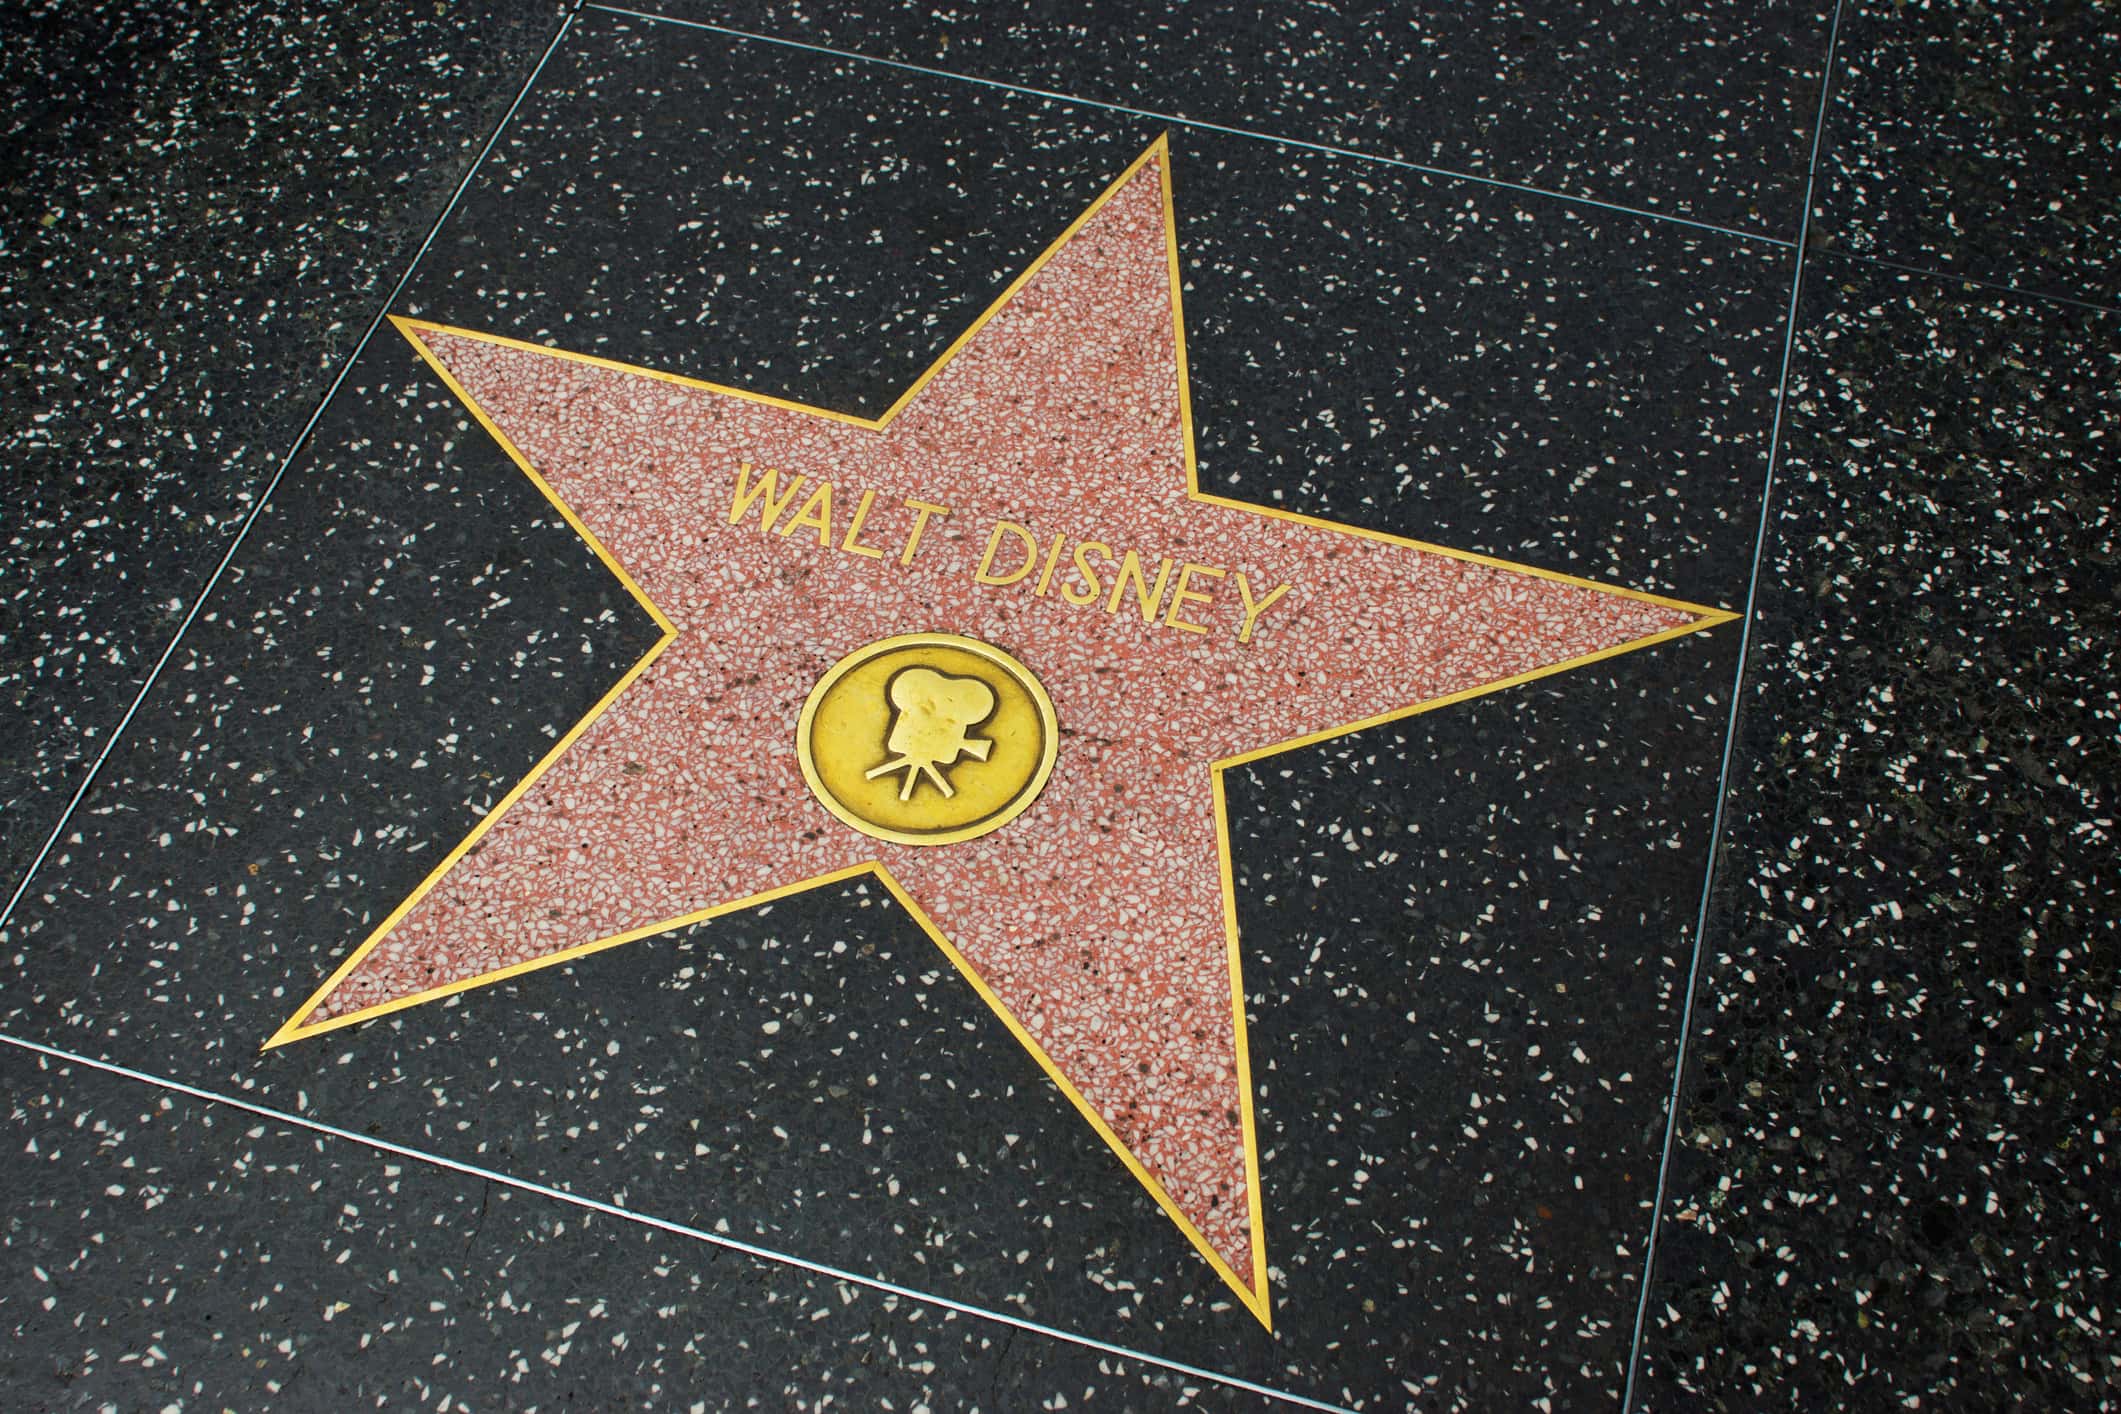 Walt Disney star on Hollywood Walk of Fame in Hollywood, California. This star is located on Hollywood Blvd. and is one of over 2,000 celebrity stars embedded in the sidewalk.